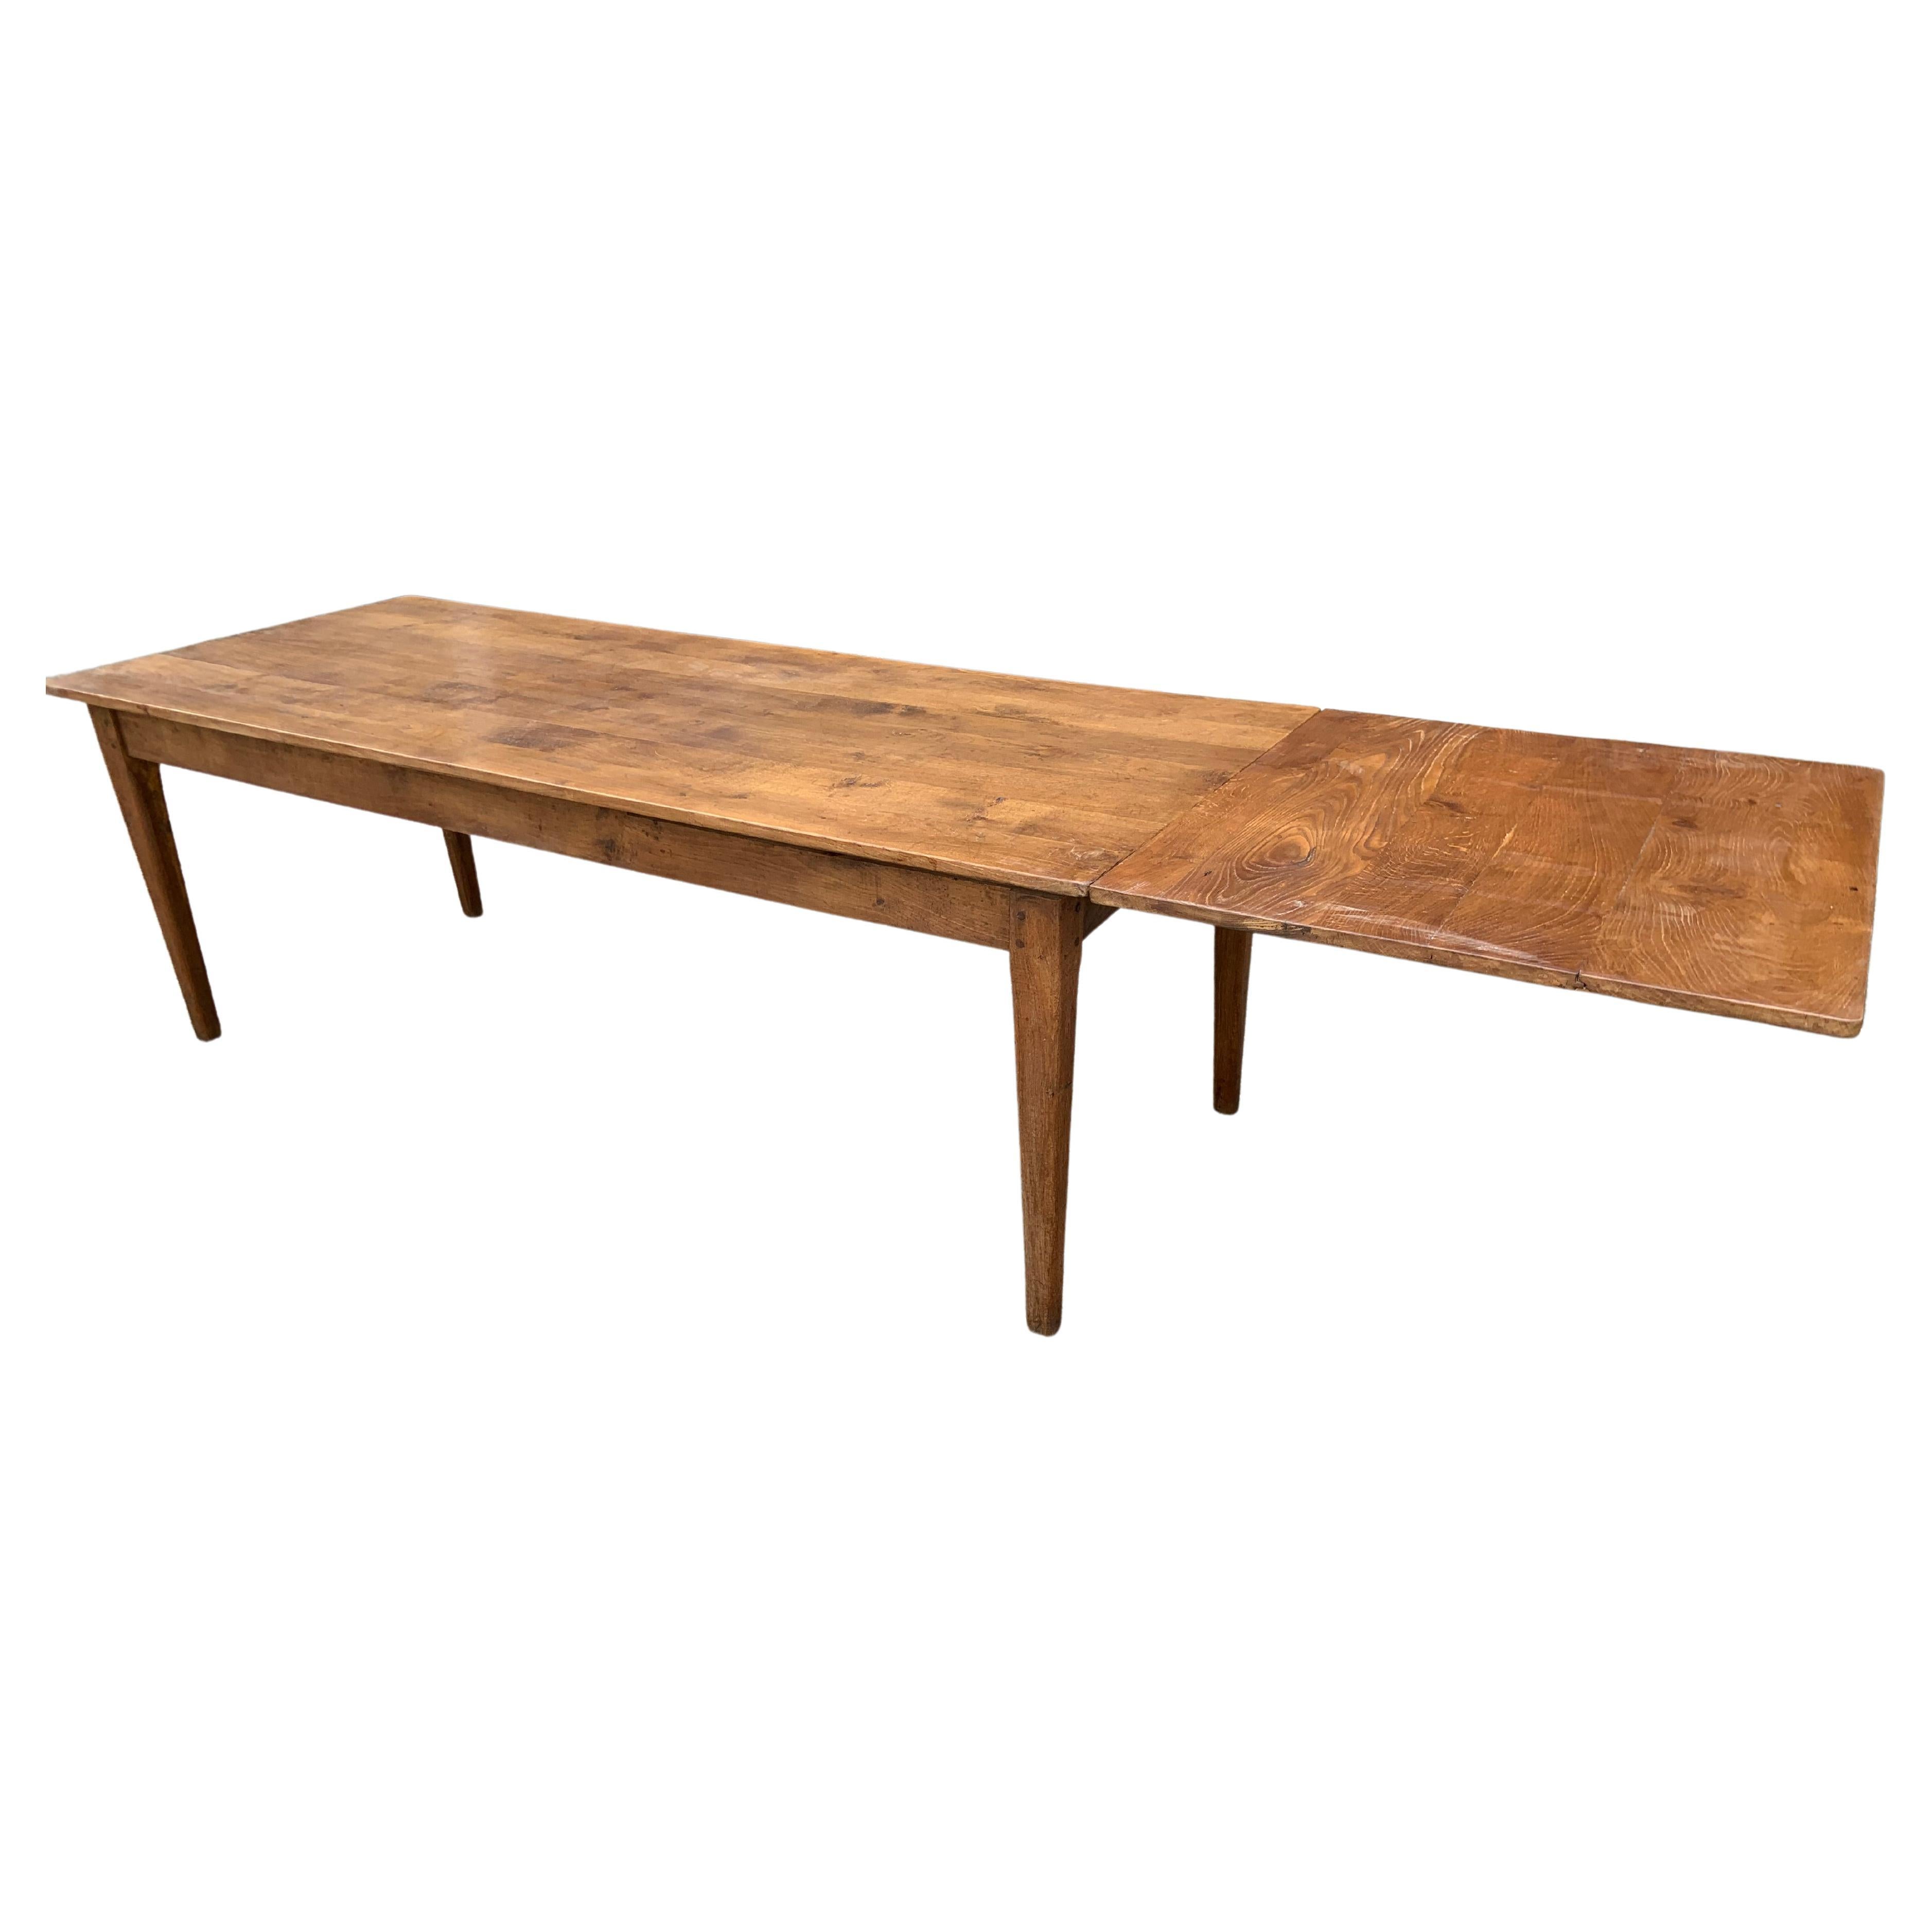 Antique Chestnut Farmhouse Table with Extension Leaf